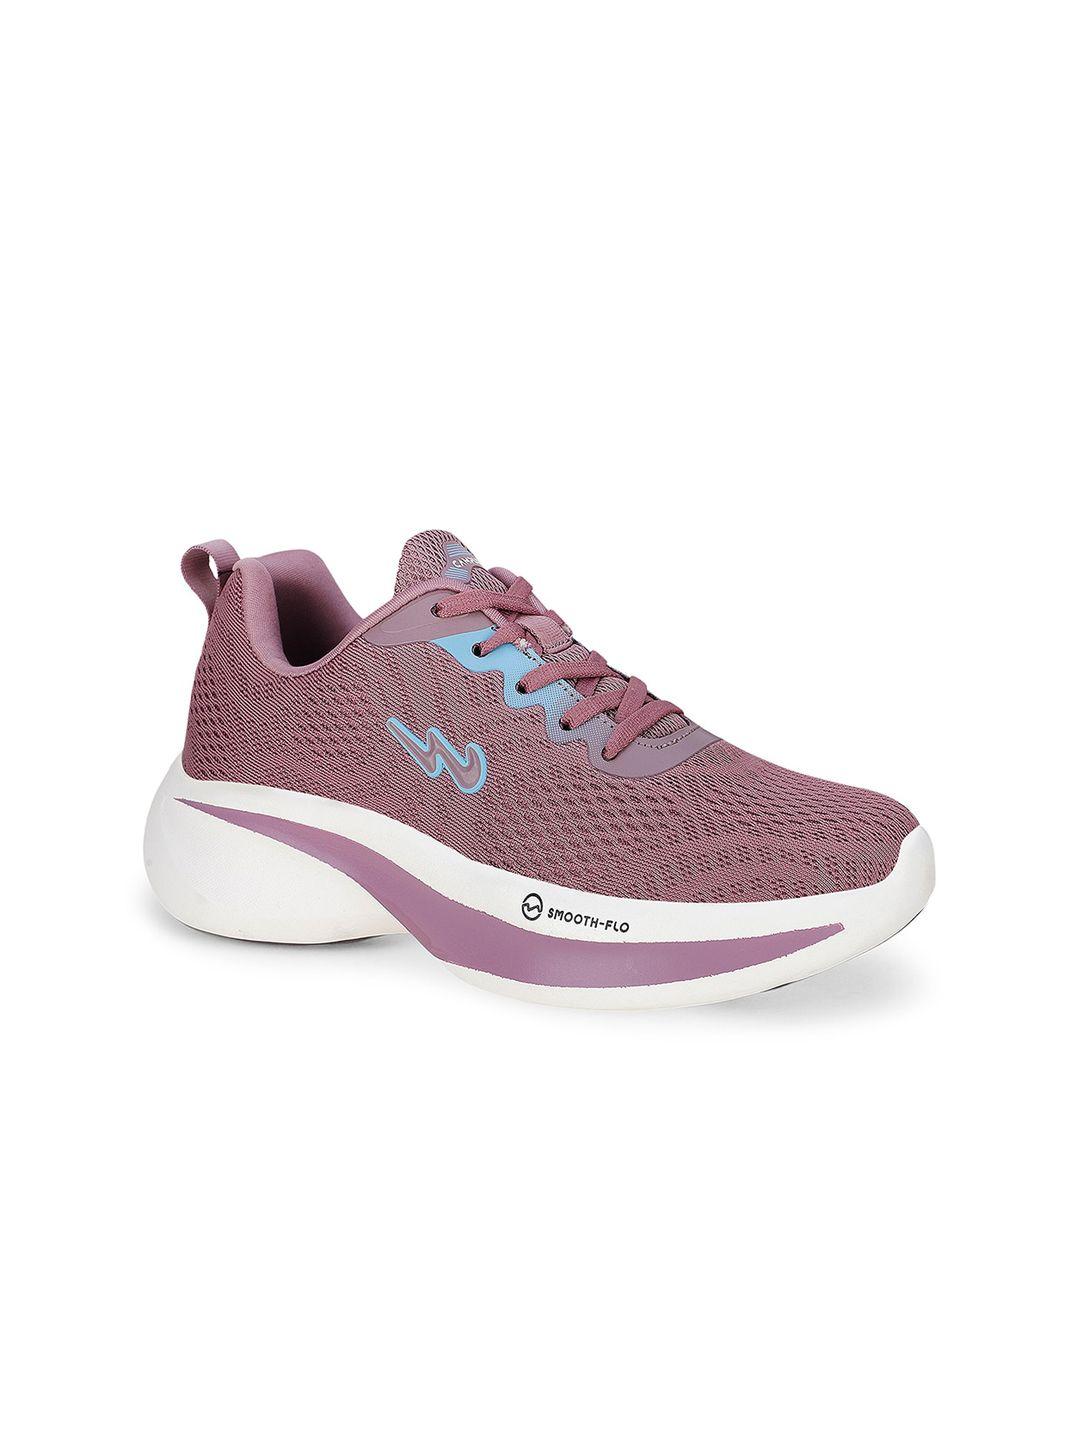 campus-women-crissy-textured-mesh-comfort-insole-contrast-sole-sneakers